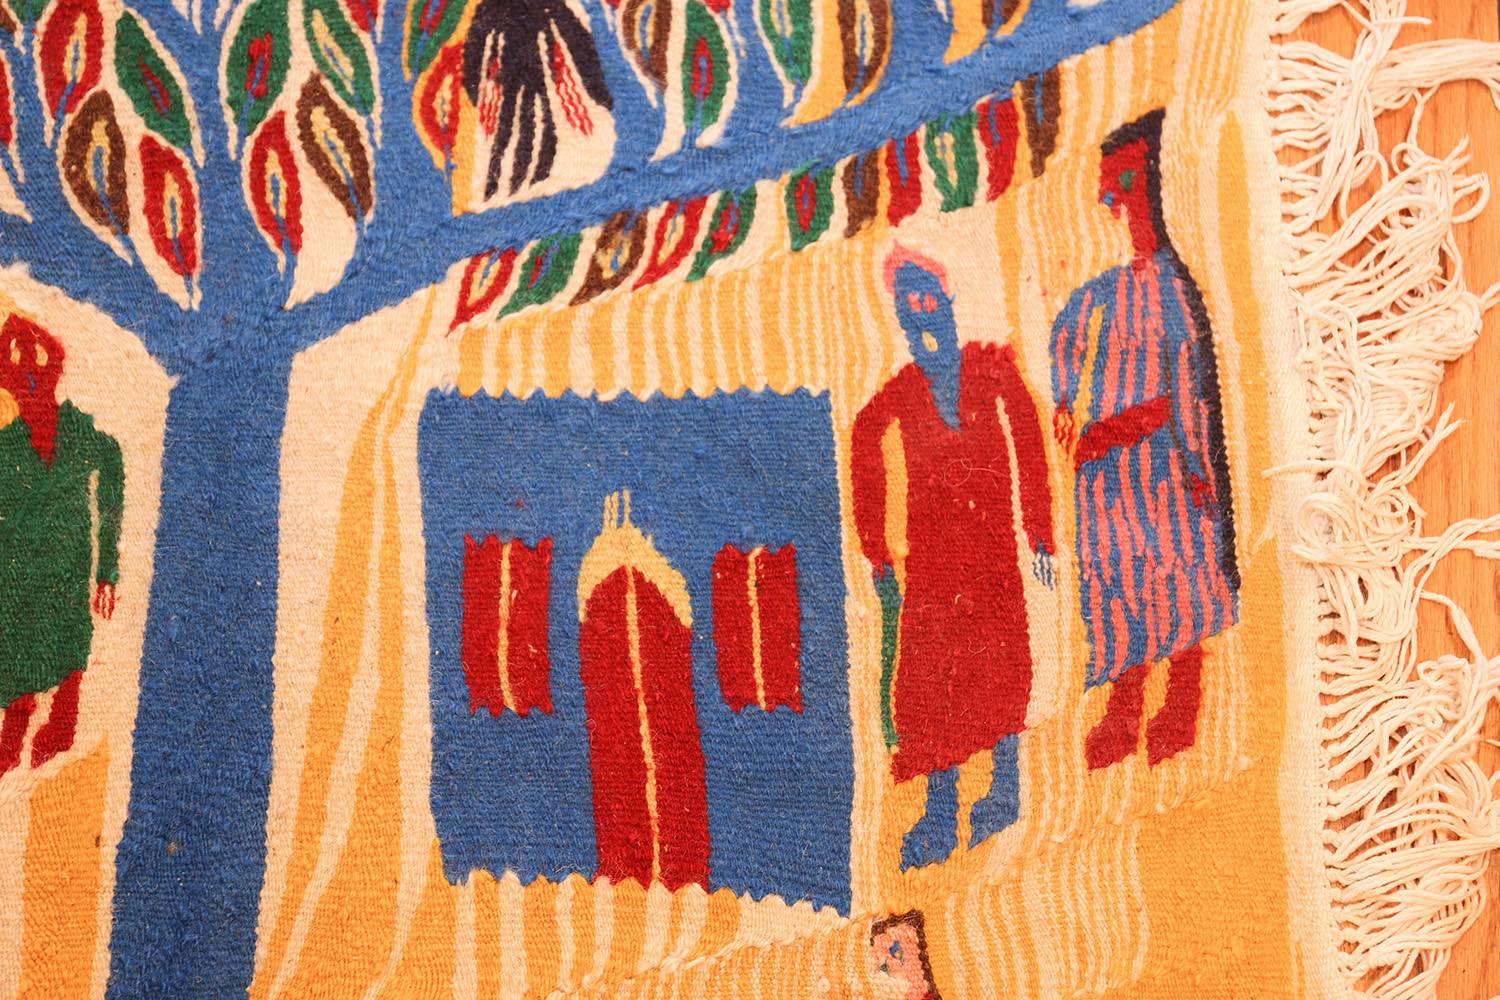 Hand-Woven Vintage Judaic Purim Scene Tapestry. Size: 6 ft x 3 ft 9 in  For Sale